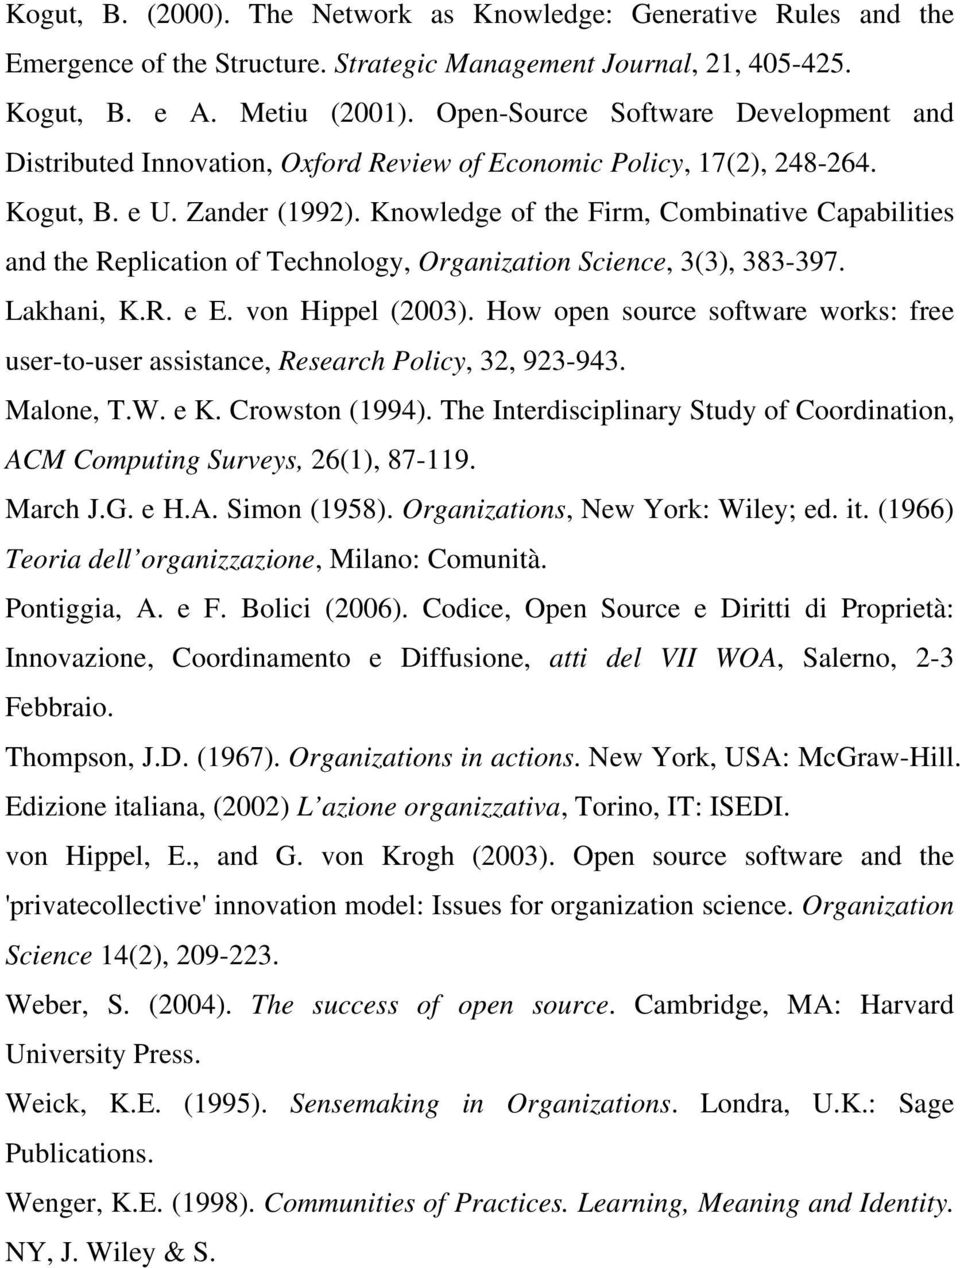 Knowledge of the Firm, Combinative Capabilities and the Replication of Technology, Organization Science, 3(3), 383-397. Lakhani, K.R. e E. von Hippel (2003).